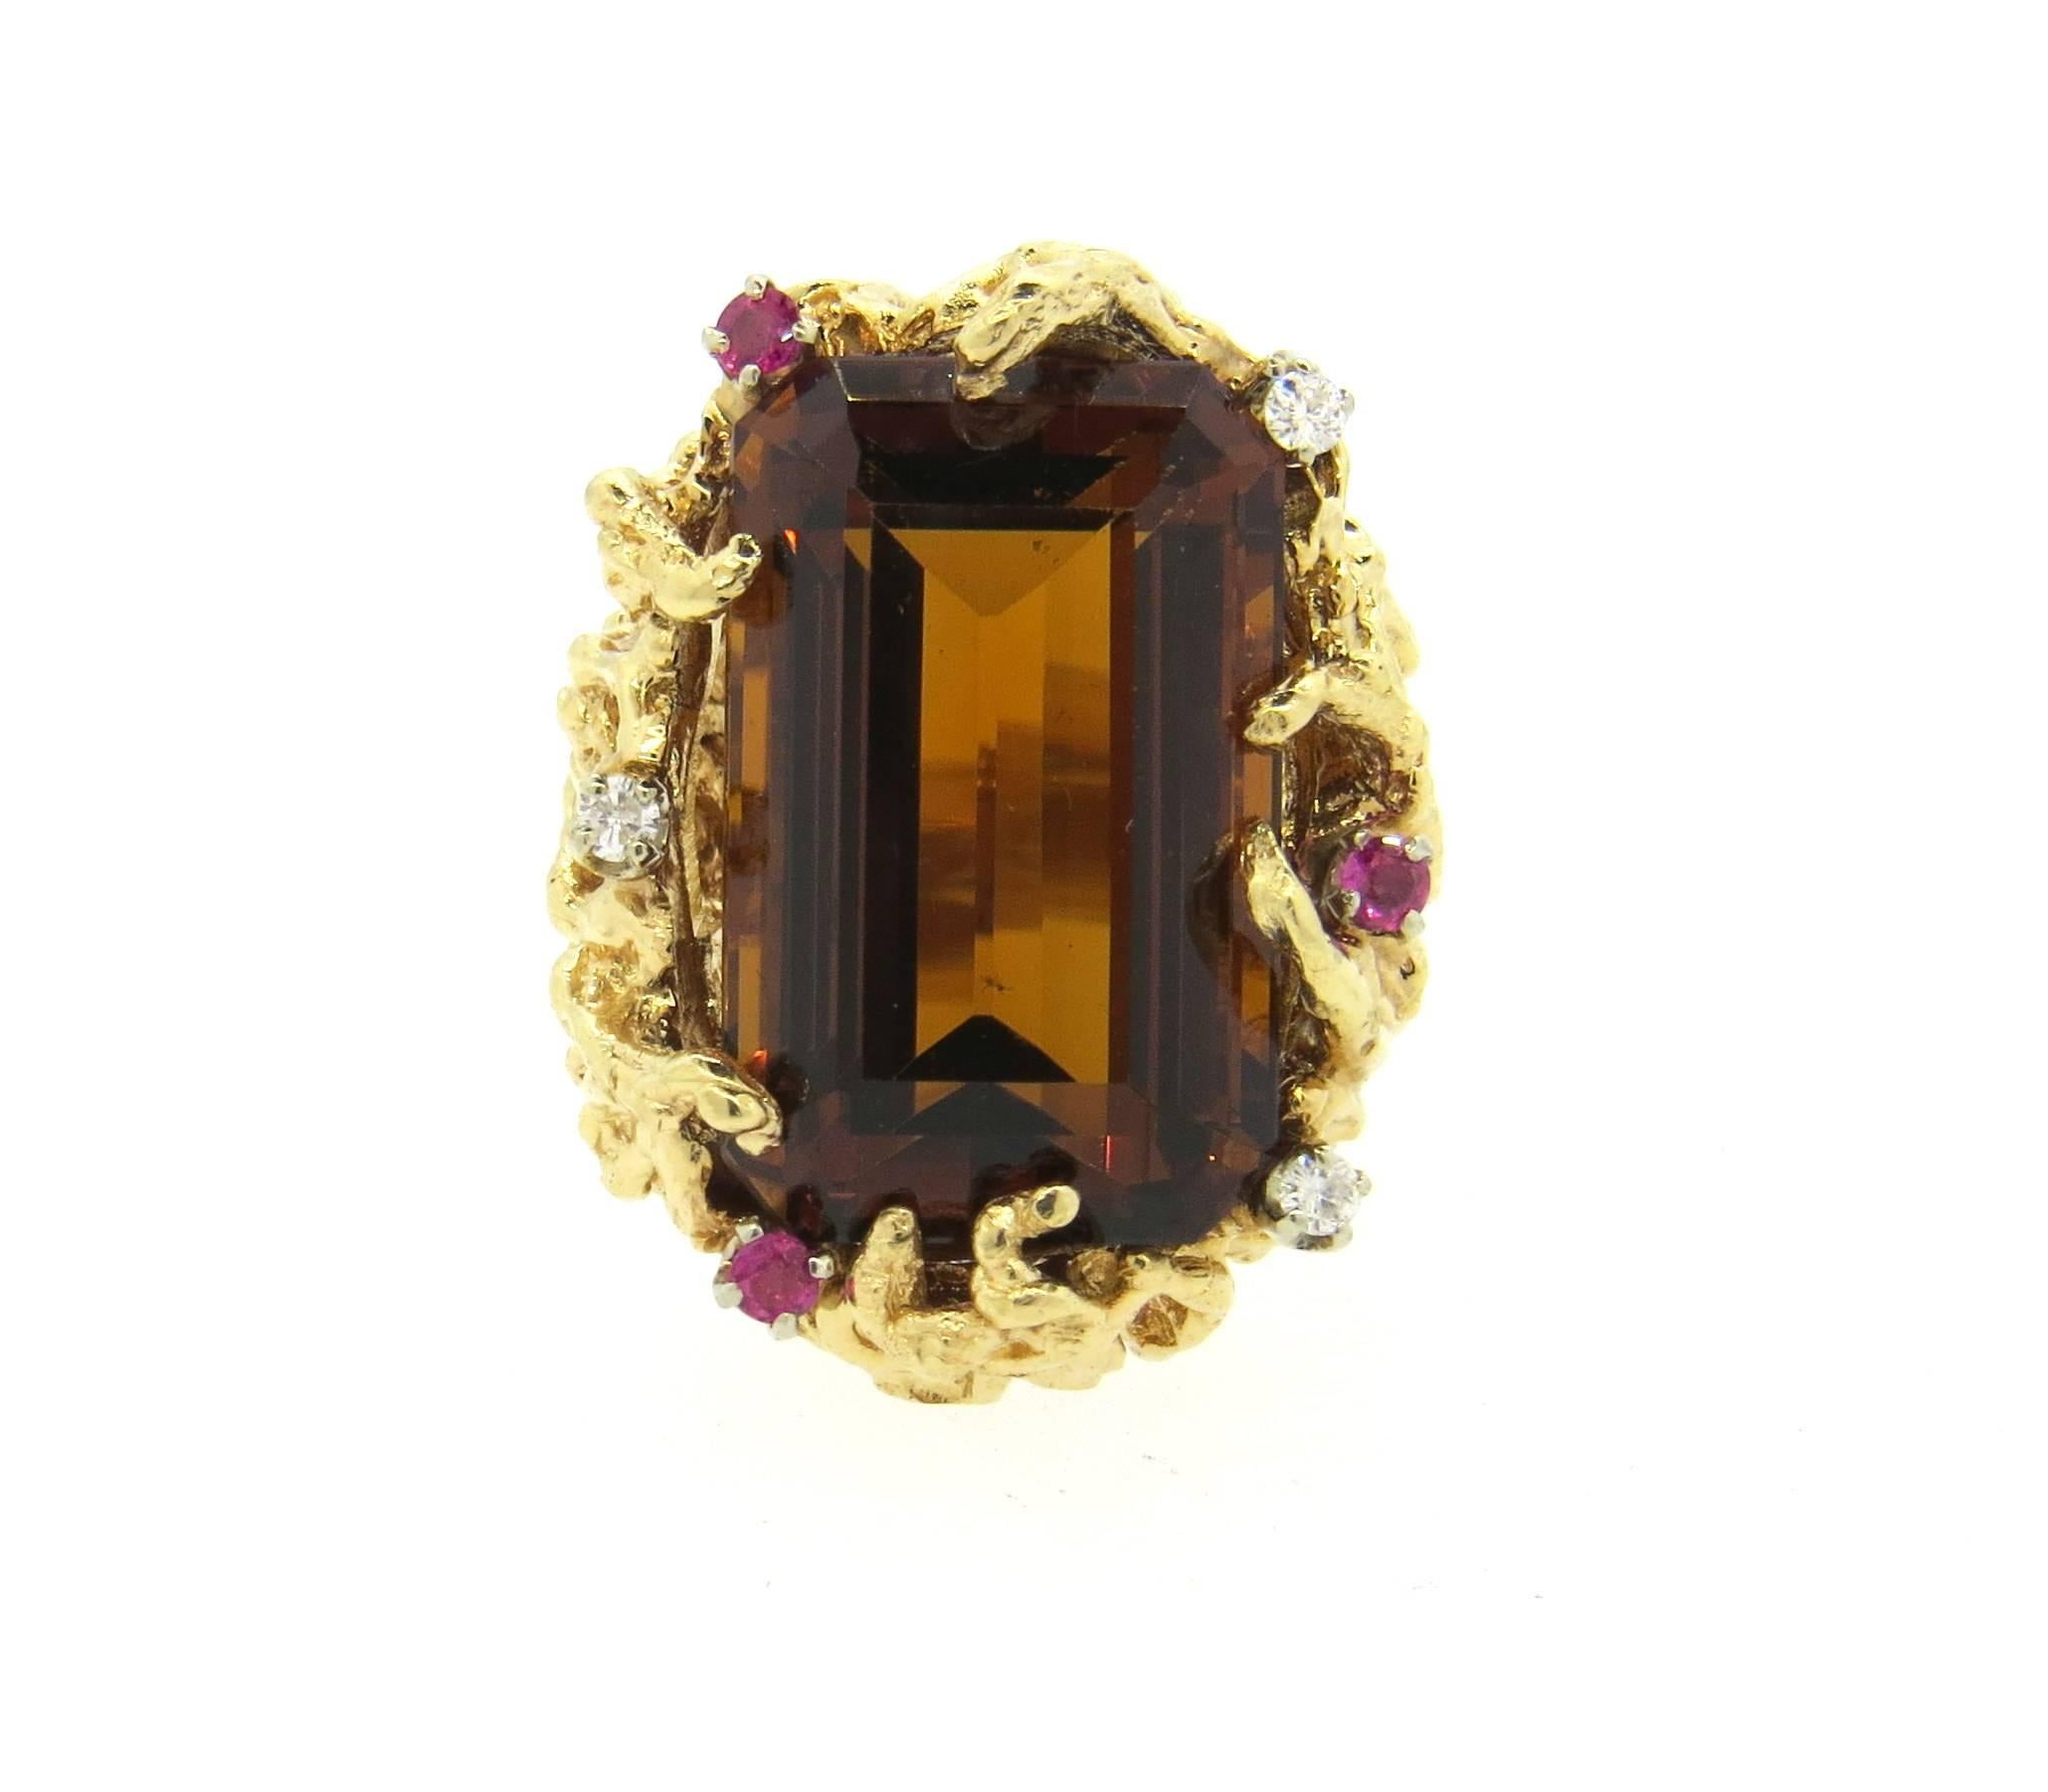 1970s vintage 14k yellow gold free form ring, set with an approx. 19.5ct citrine, surrounded with rubies and approx. 0.06ctw in diamonds. Ring is a size 7, ring top is 27mm x 21mm, sits approx. 14mm from the finger. Marked 14k. Weight of the piece -